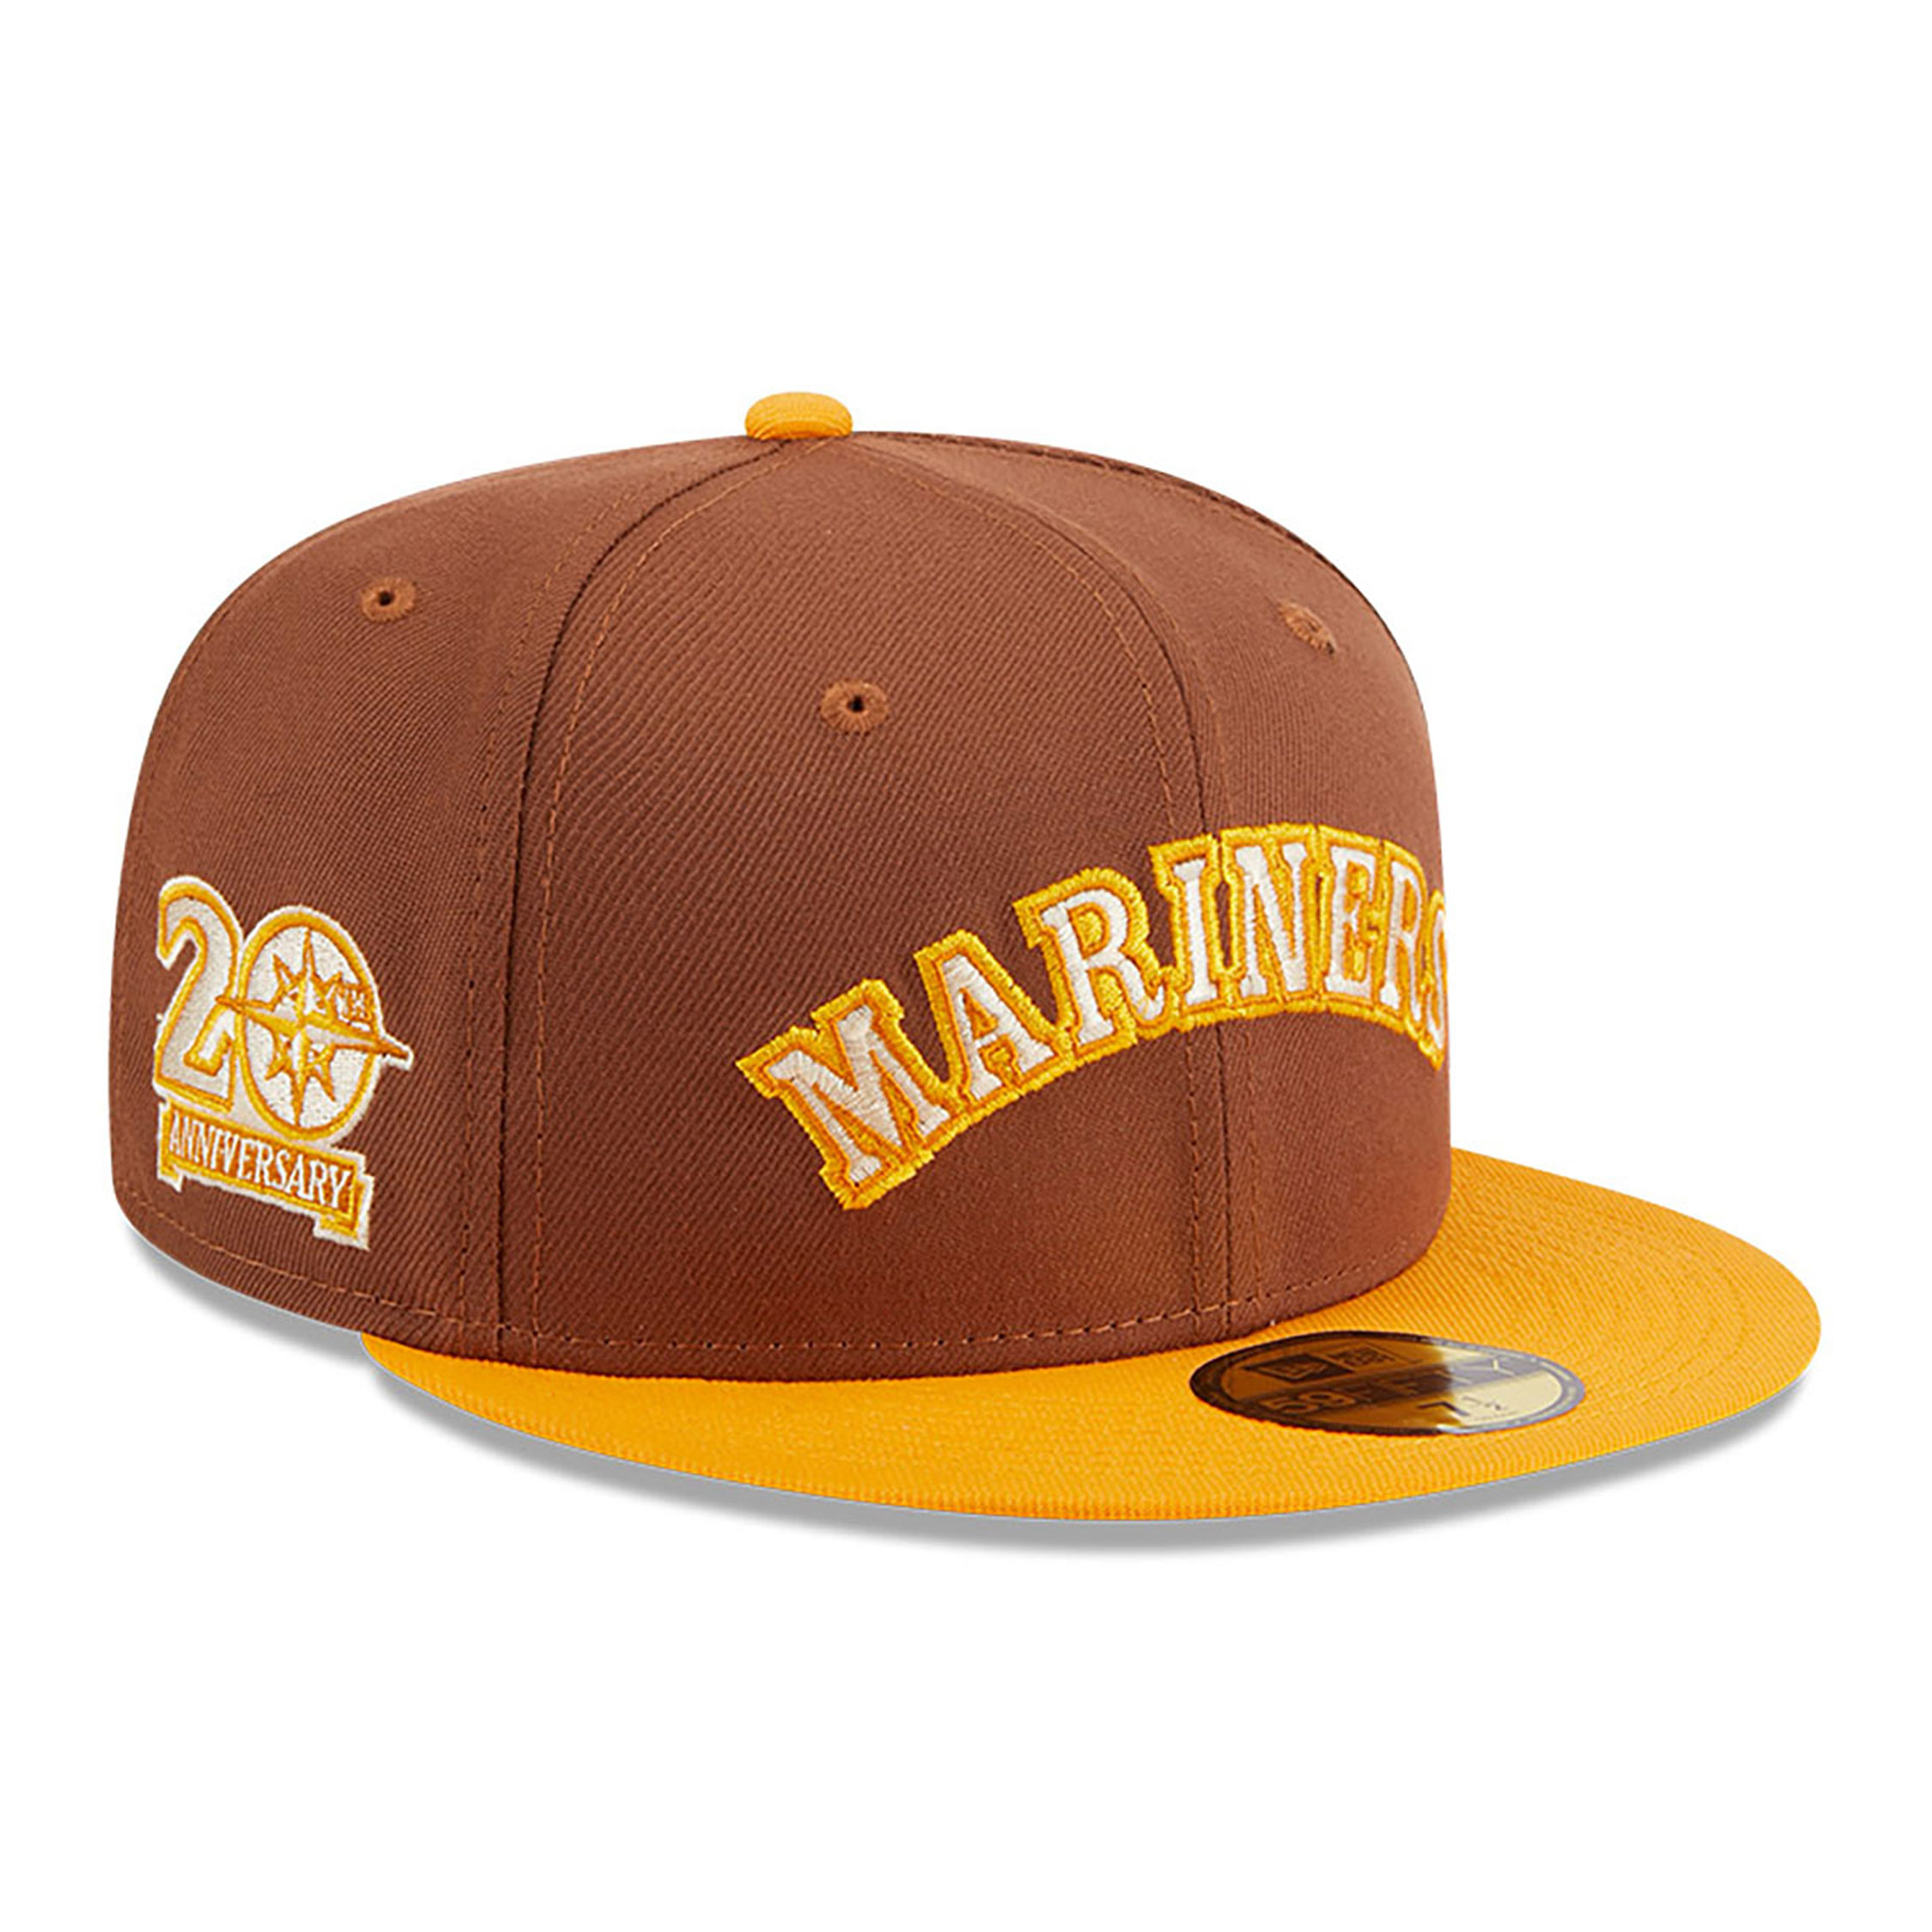 Brown Fitted Cap | Brown Fitted Hats | New Era Cap UK